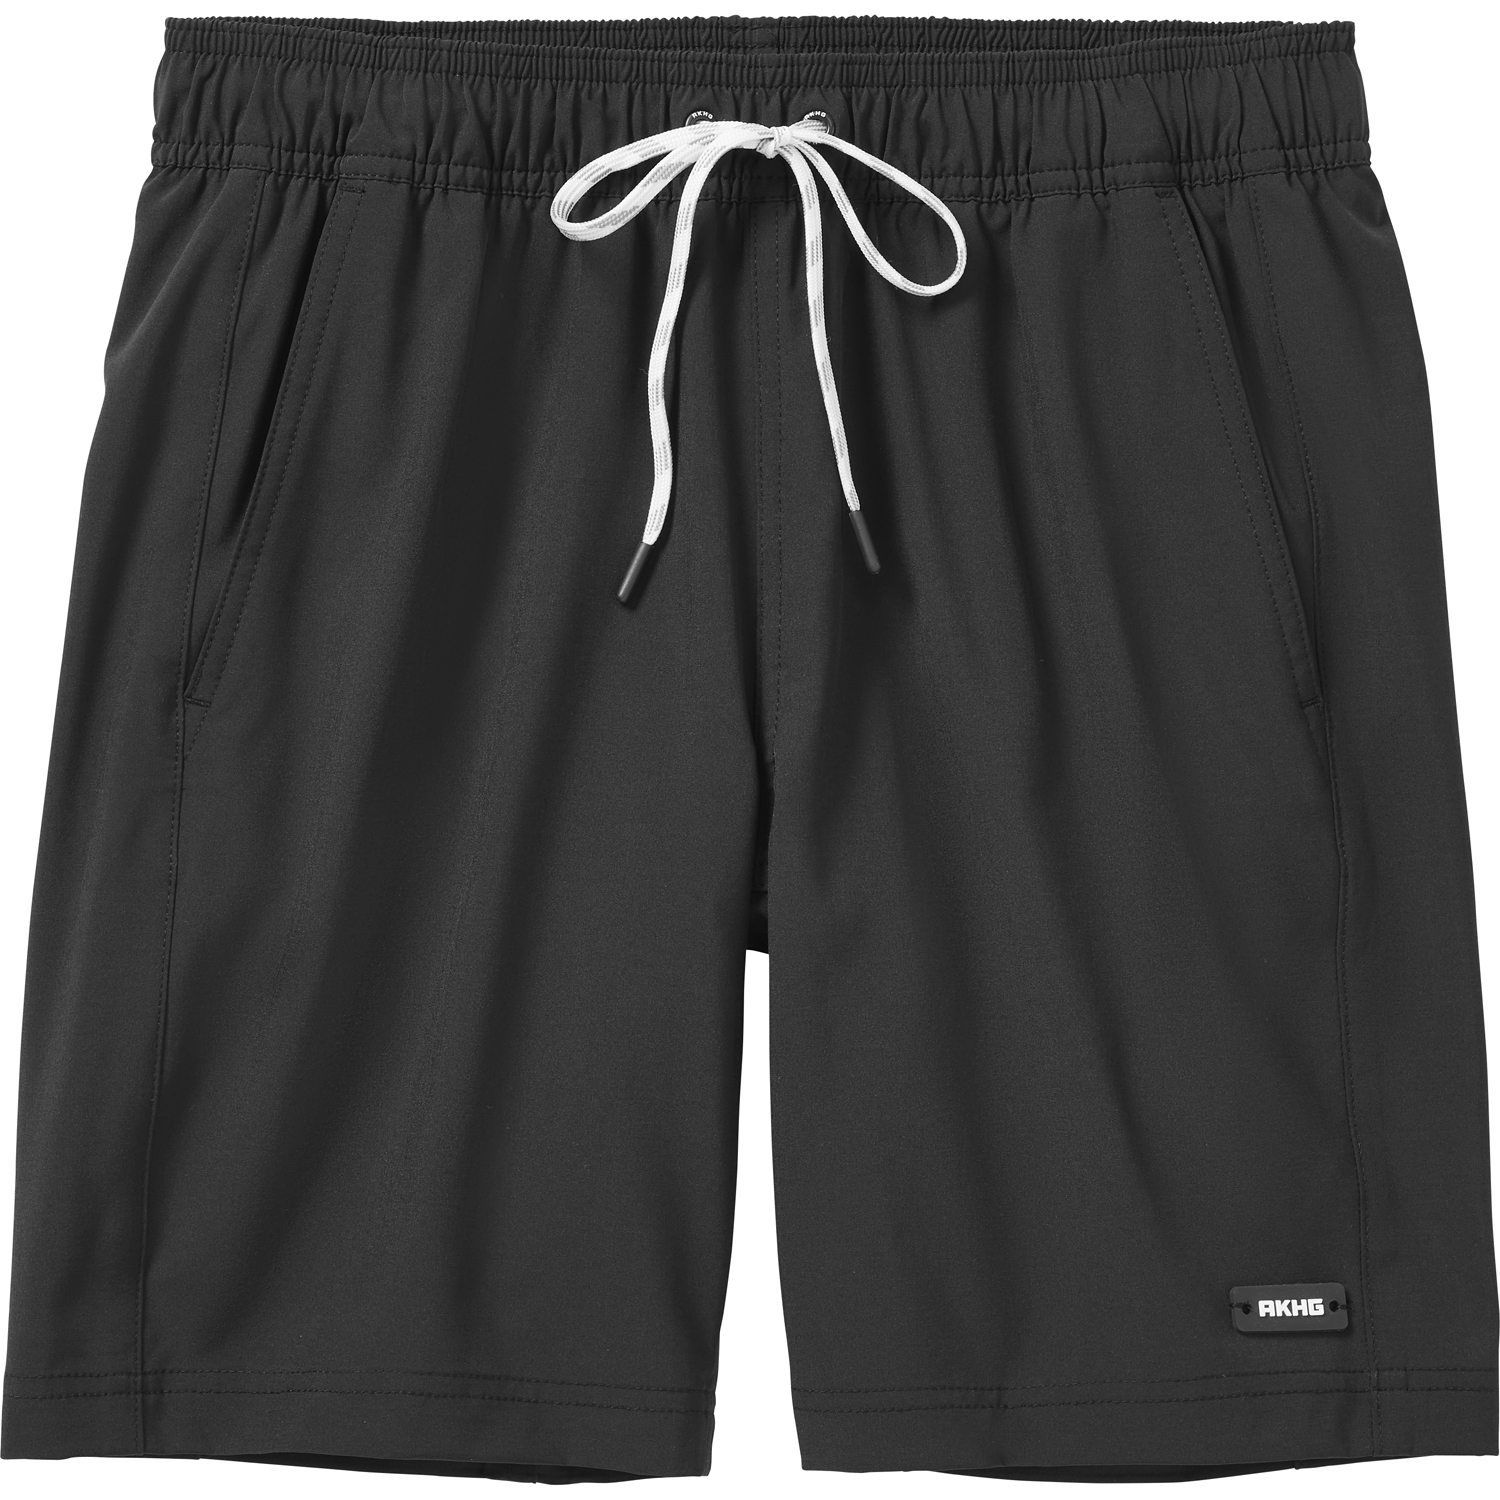 Mens Akhg Lost Lake 8 Swim Shorts With Liner Duluth Trading Company